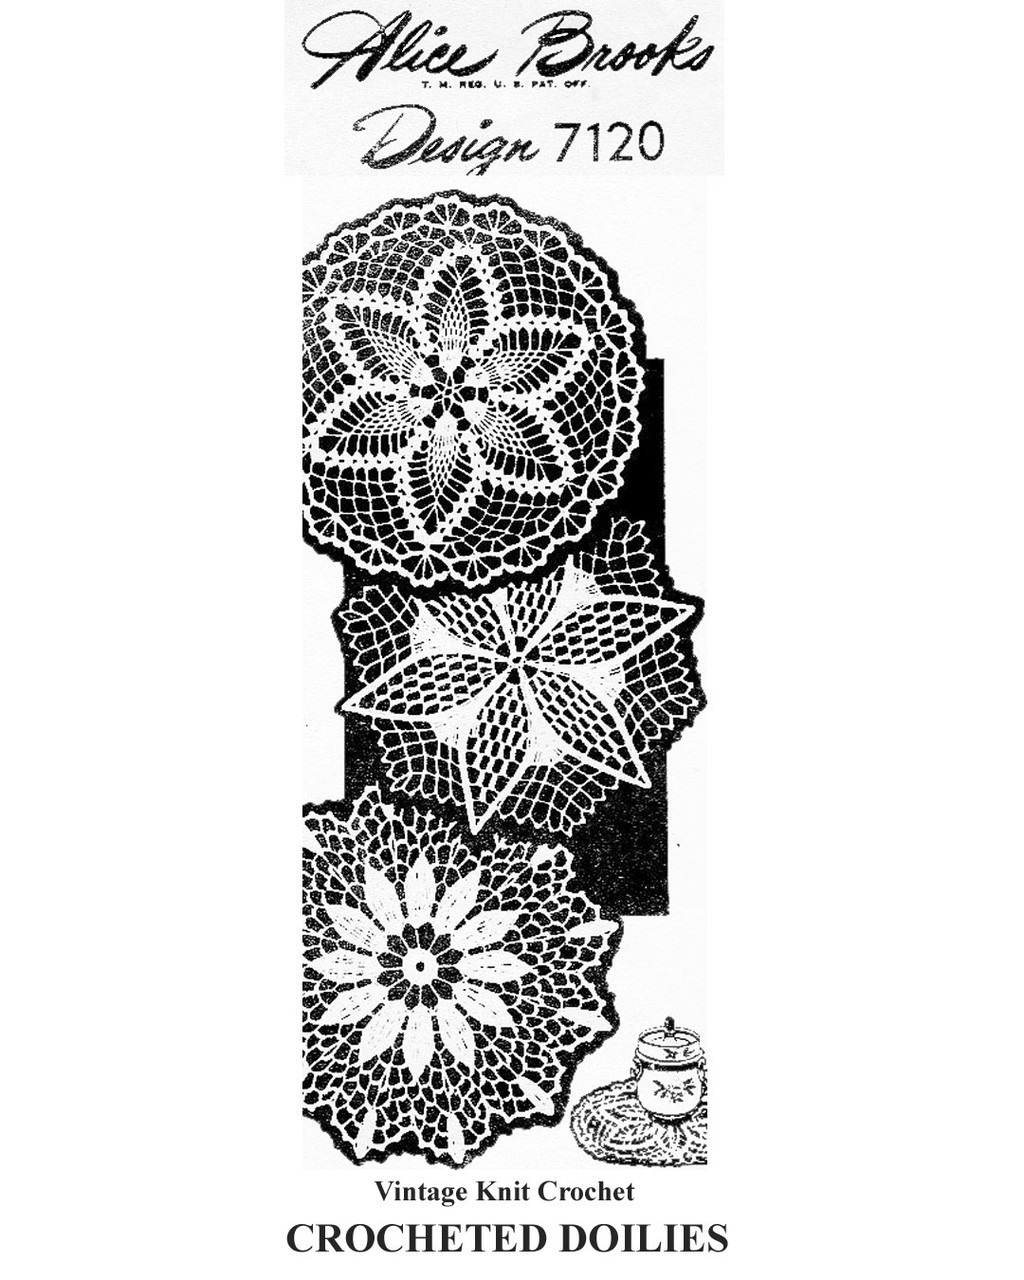 Three Crocheted Doilies style, Mail Order Design 7120